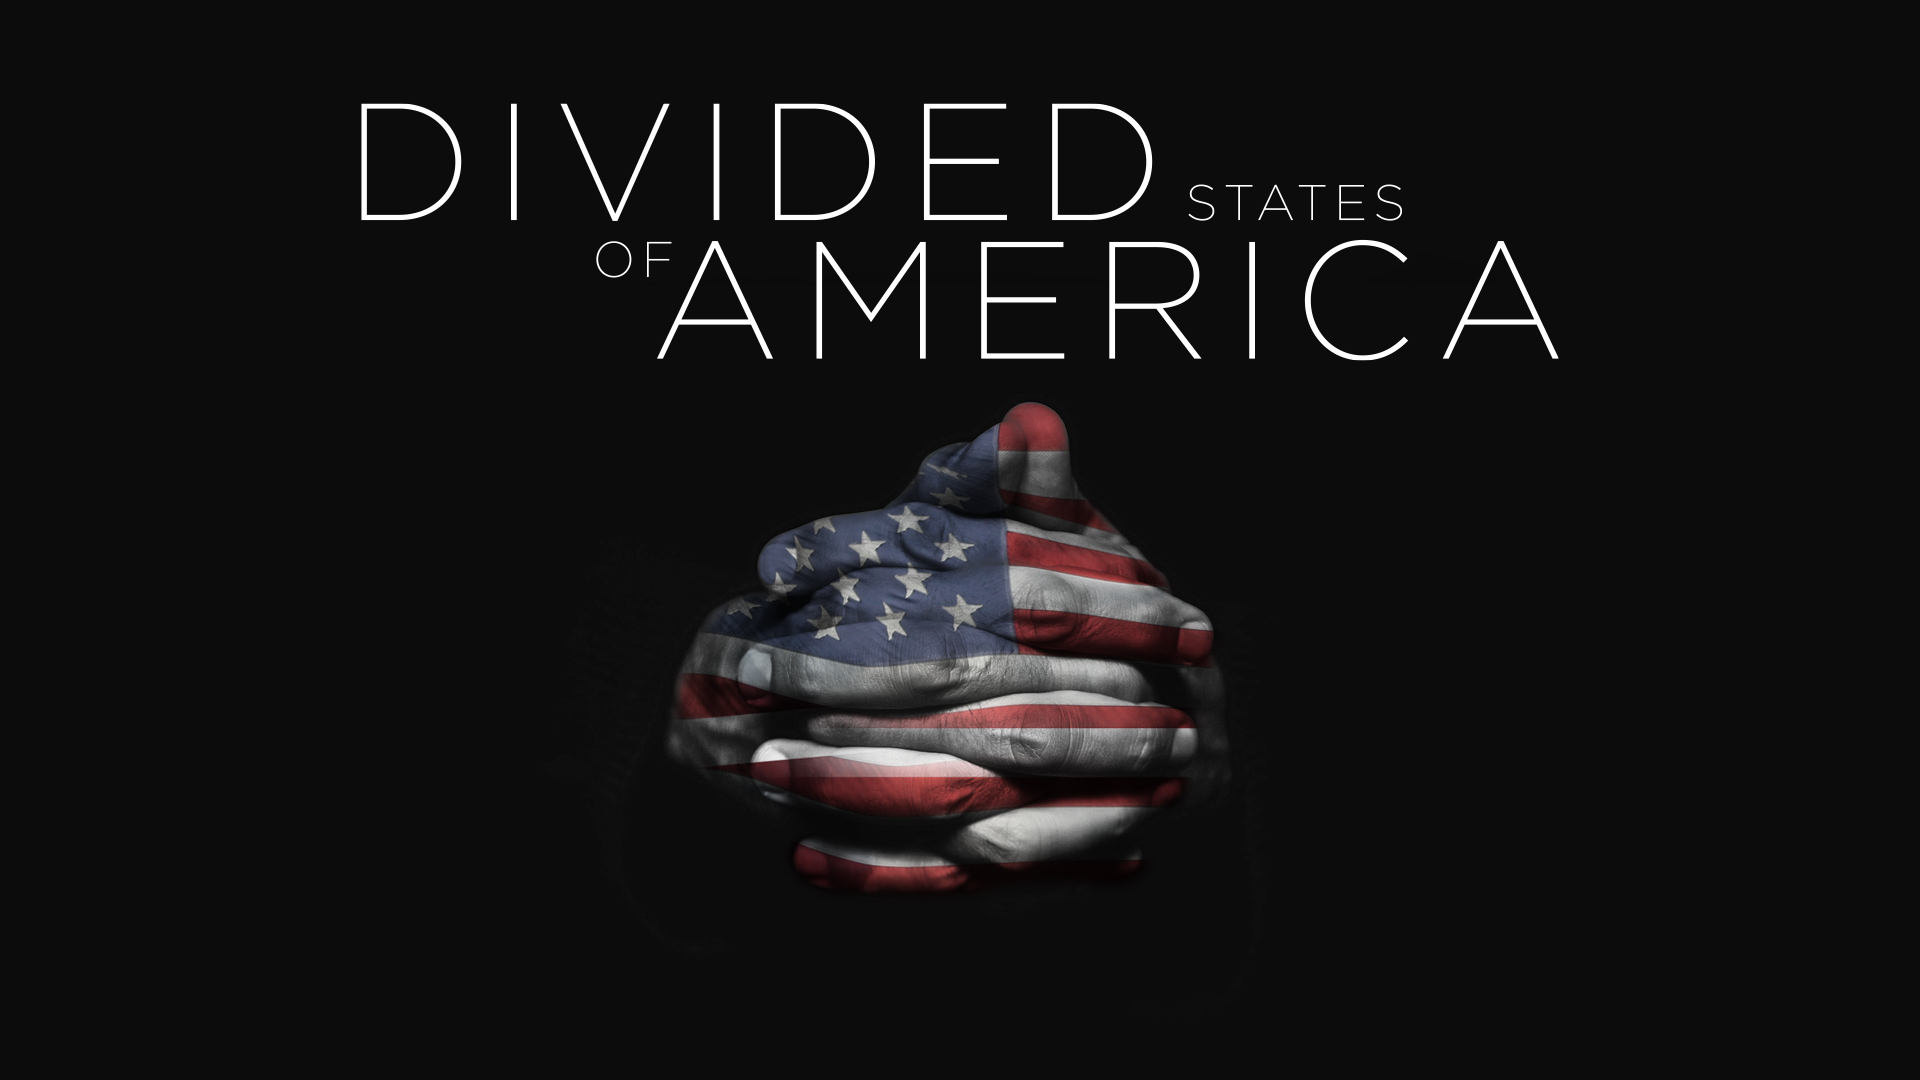 Book The Divided States Of America – What Is It About?